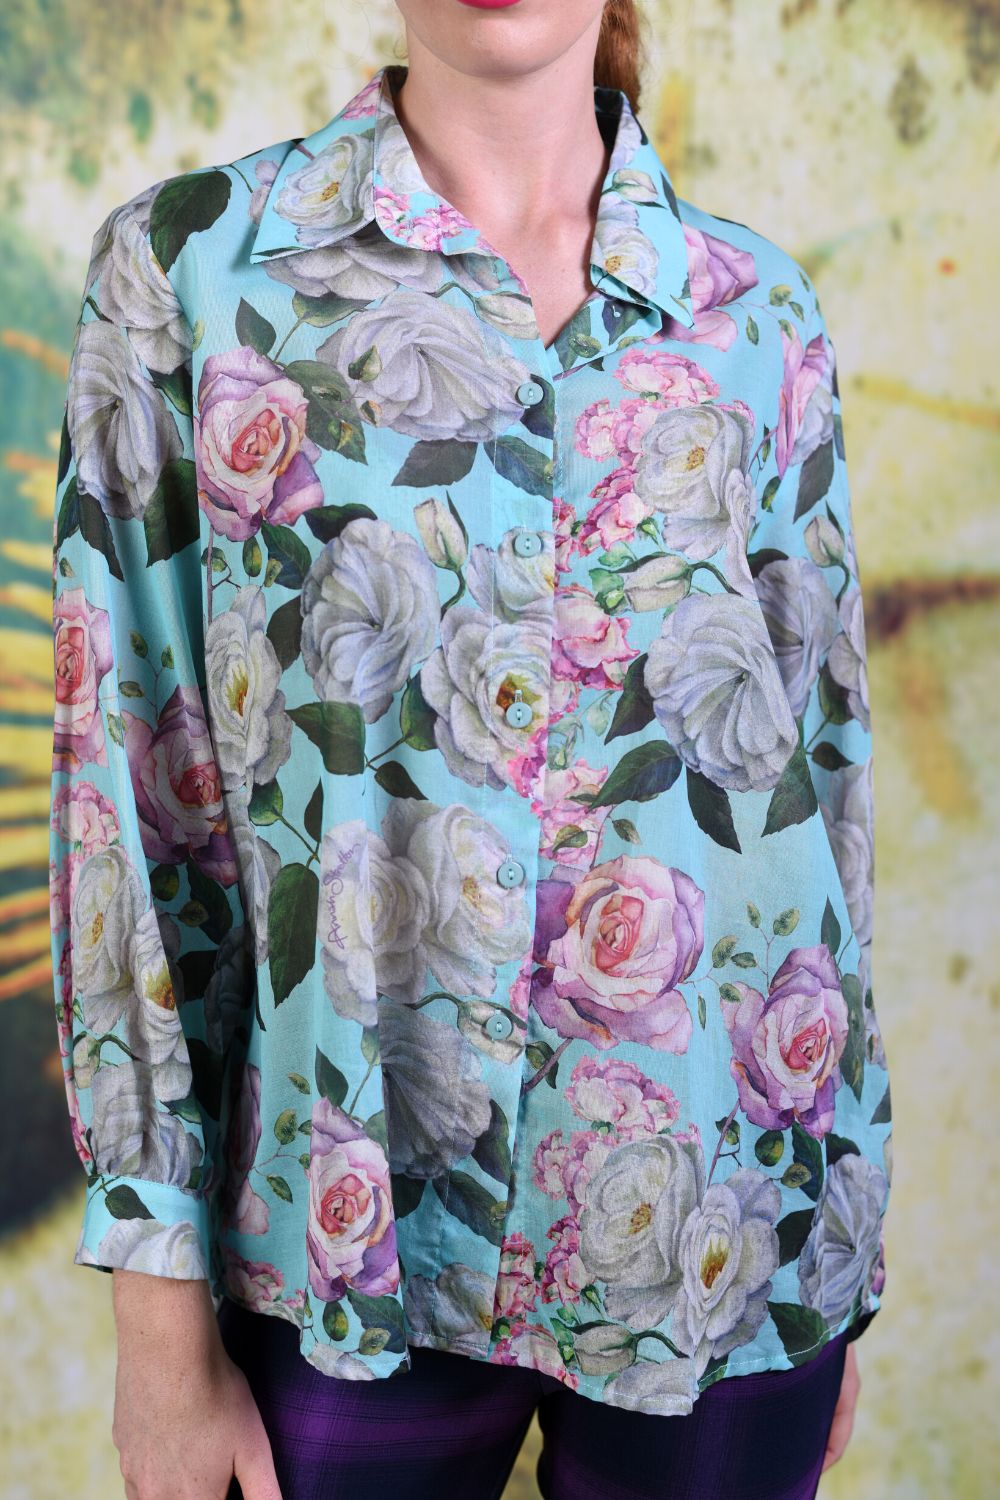 Close-up of fabric of the Annah Stretton Elsie Shirt showing a pink and white rose pattern atop a mint blue background